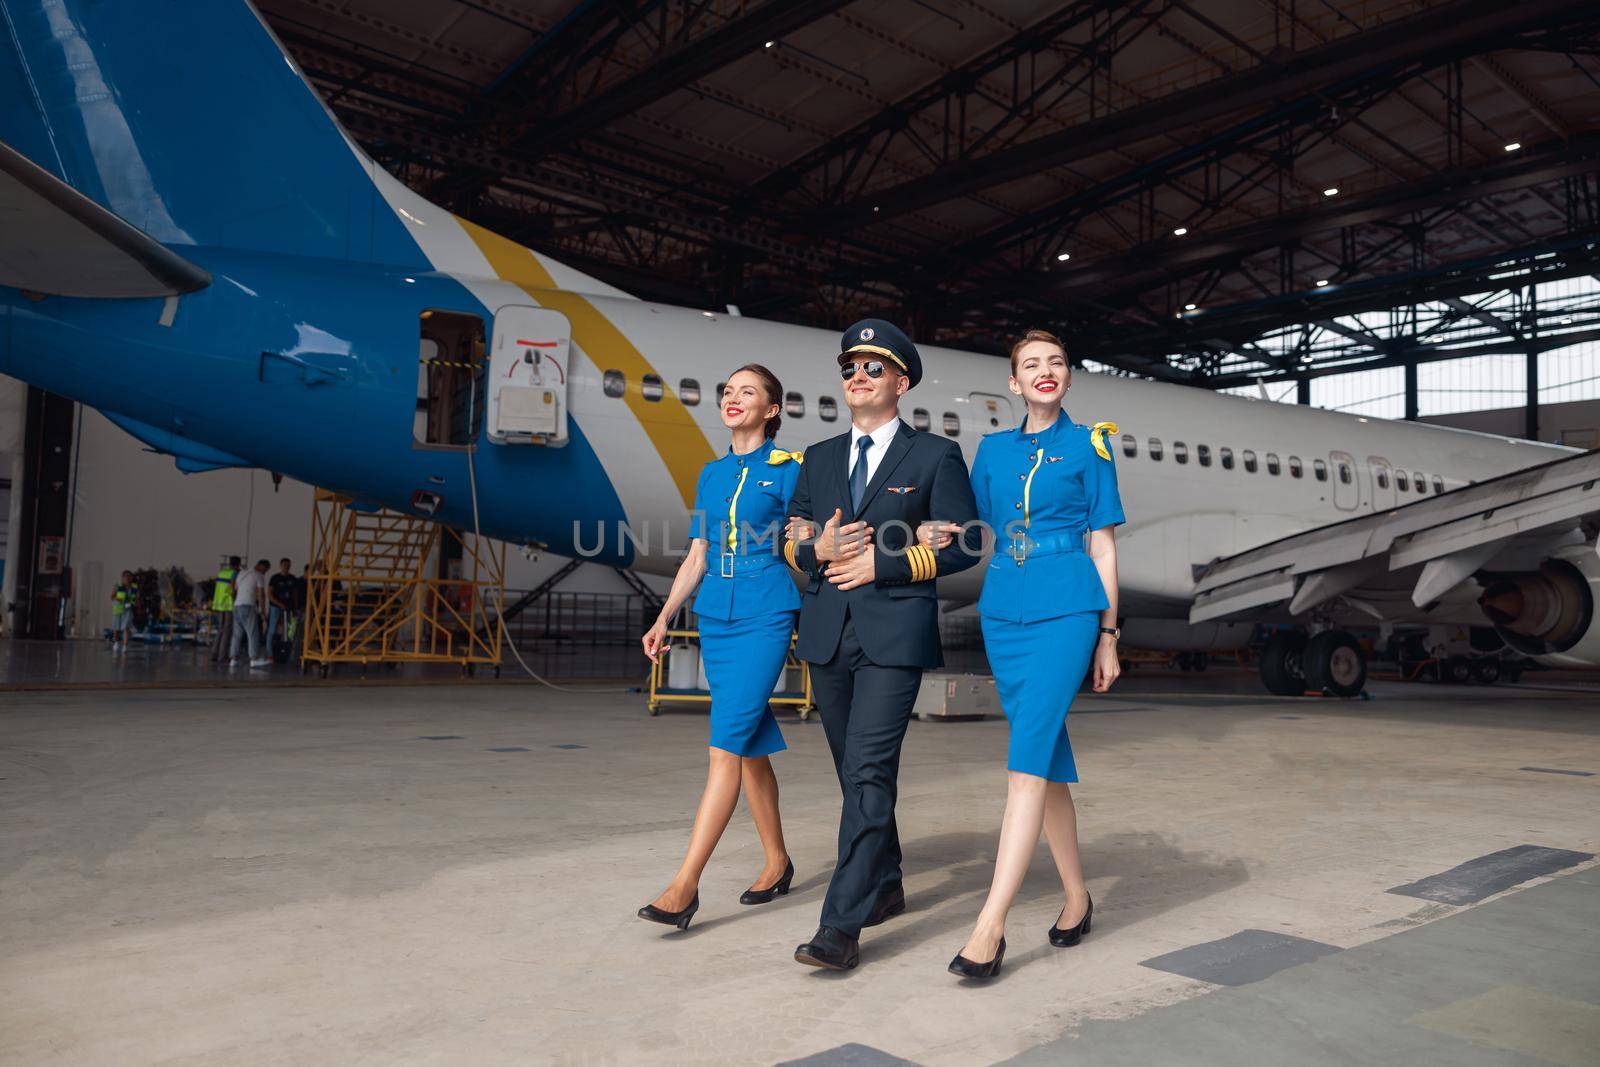 Full length shot of pilot in uniform and aviator sunglasses walking together with two air stewardesses in blue uniform in front of big passenger airplane in airport hangar by Yaroslav_astakhov